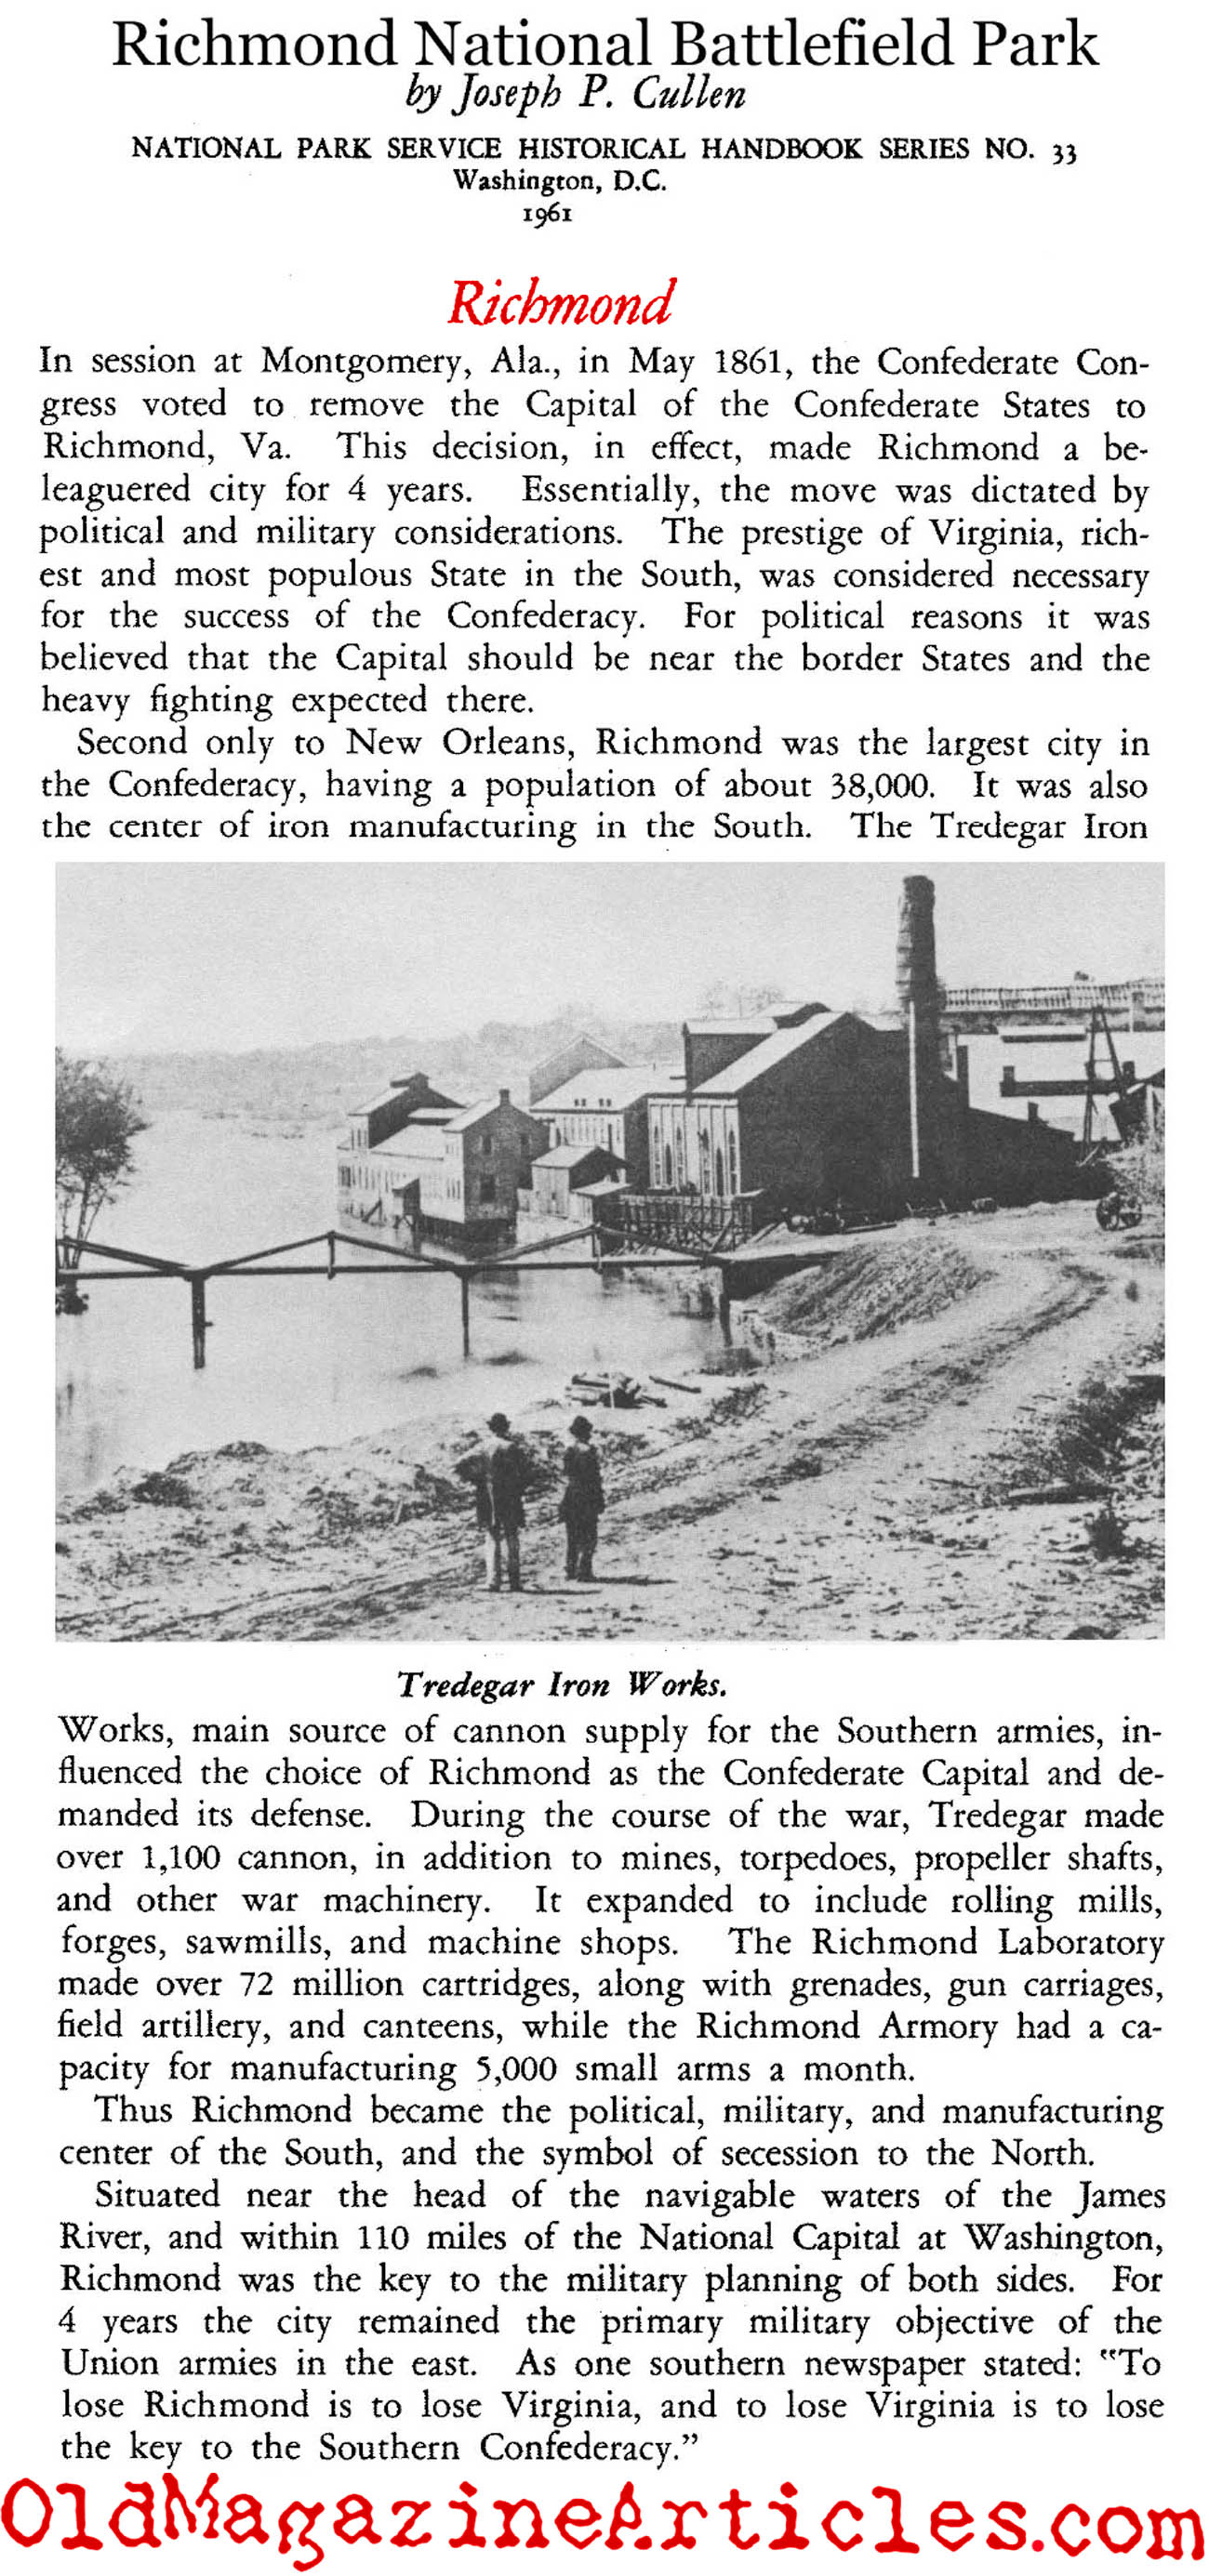 Richmond Selected as the Capital of the Confederacy (National Park Service, 1961)